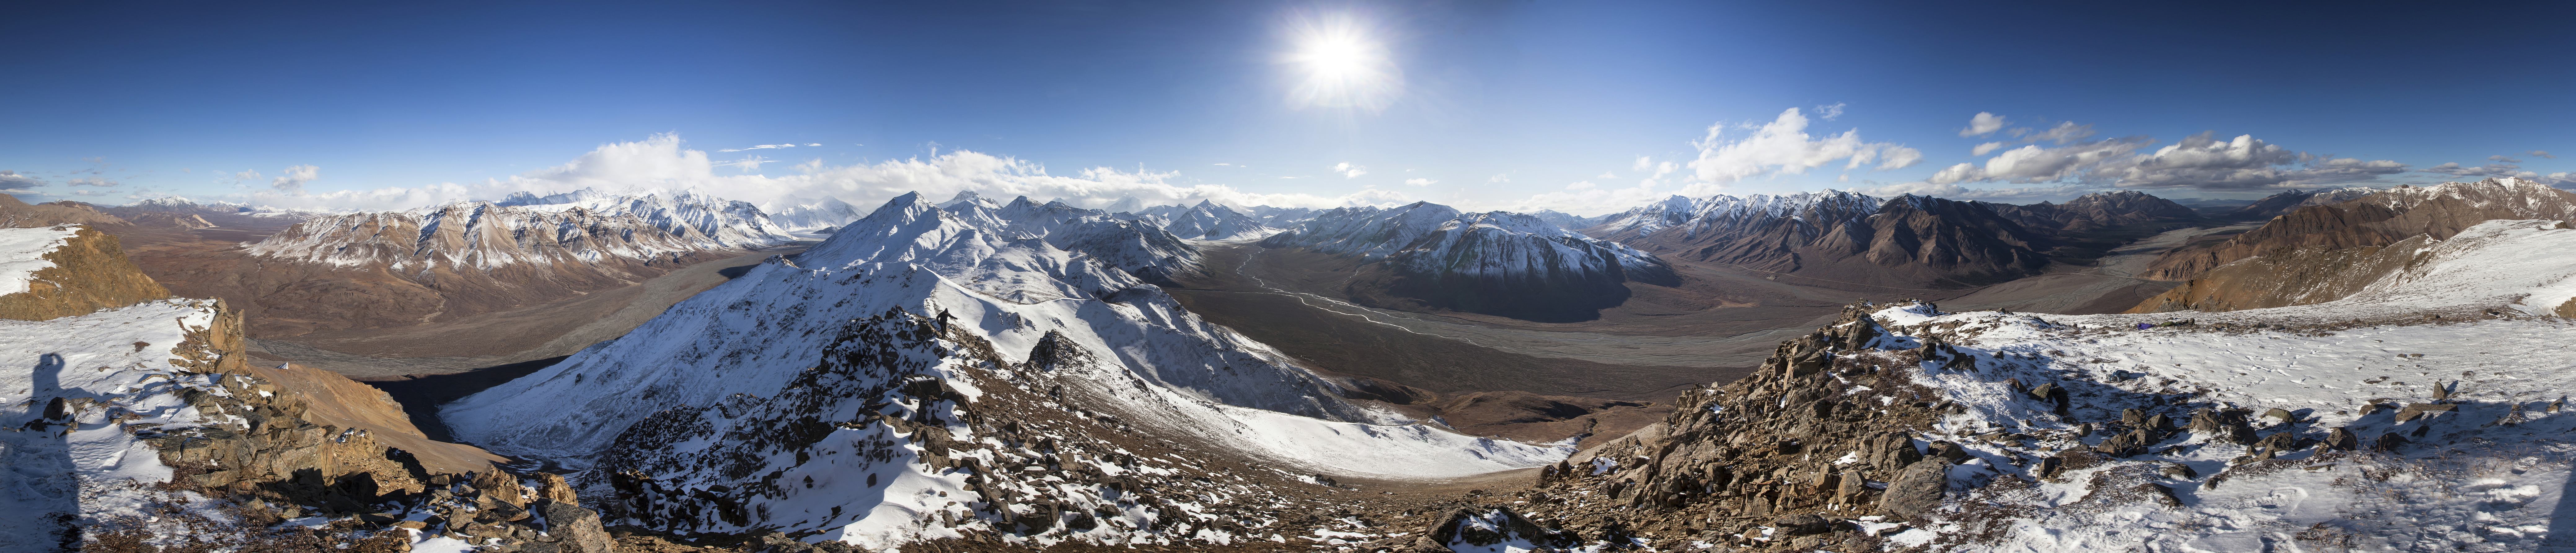 View from atop a snow-dusted mountain, of other snowy mountains and wide river plains